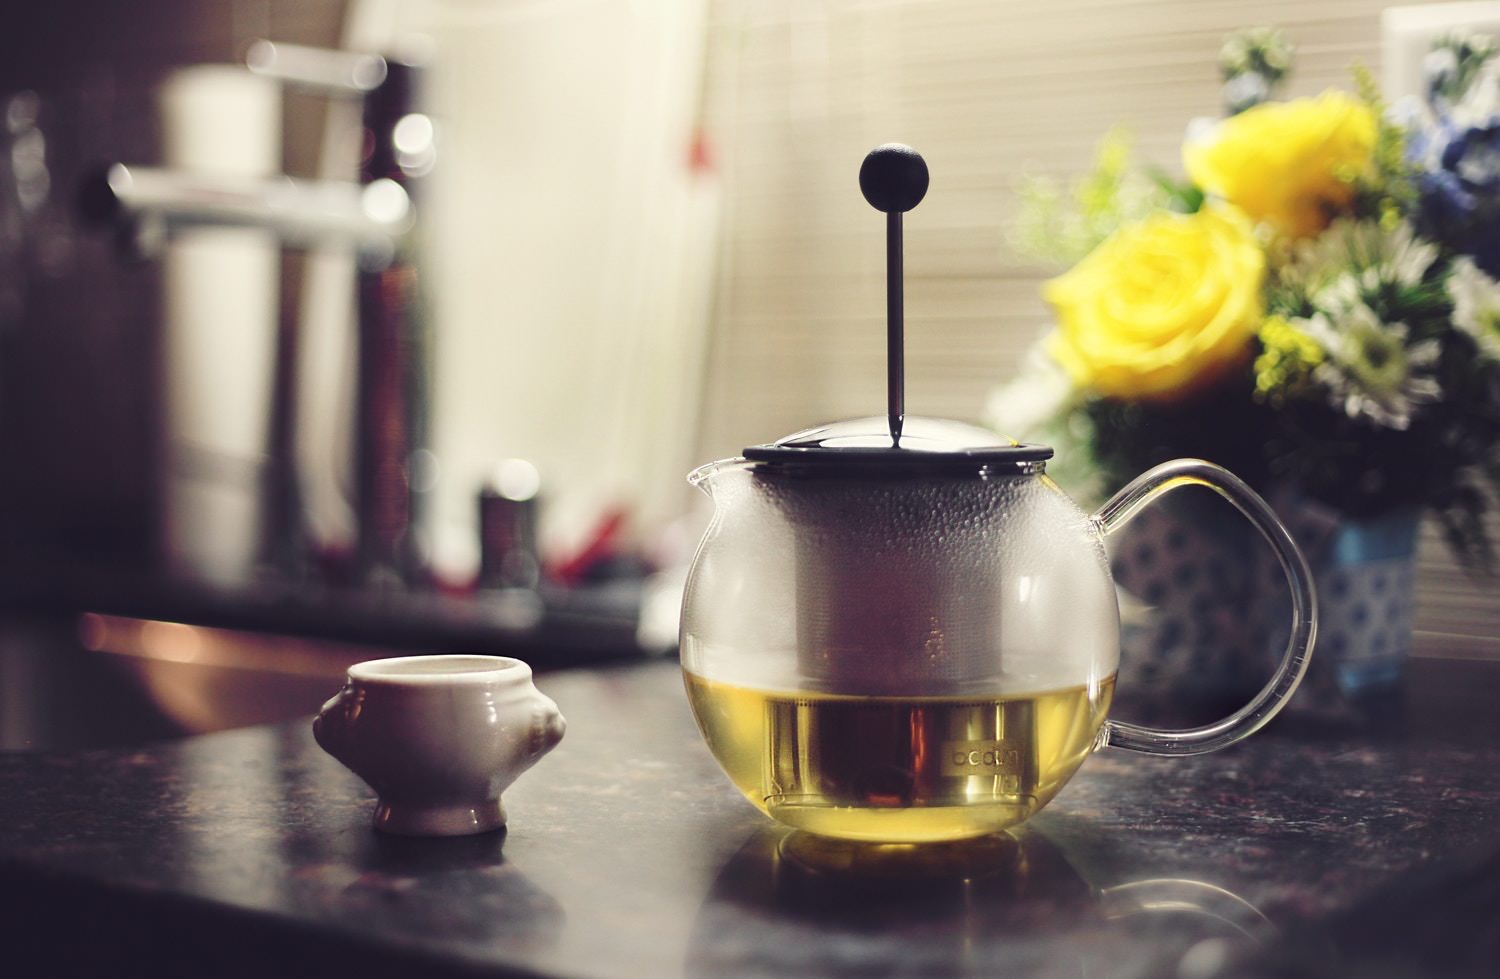 Drink herbal teas instead when you're trying to give up alcohol